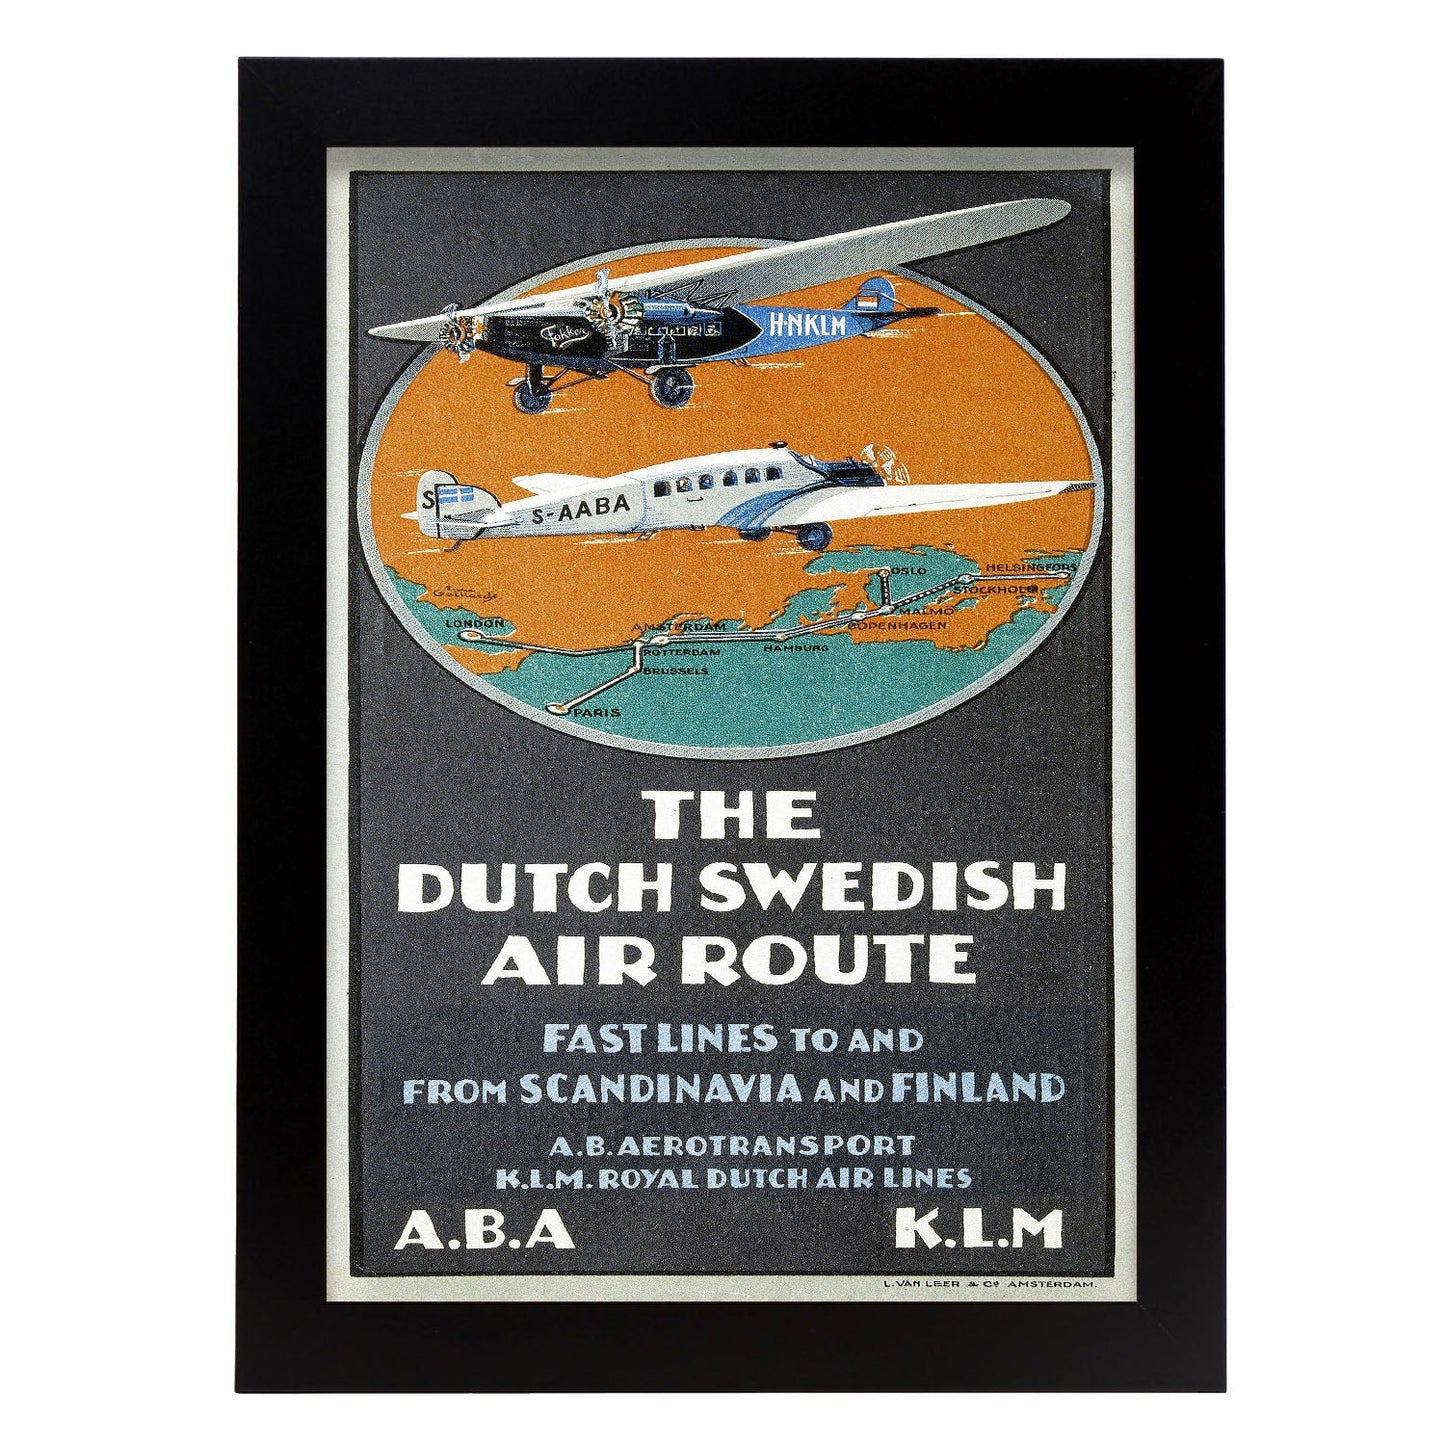 ABA_Advertisment_leaflet_about_The_Dutch_Swedish_Air_Route_by_ABA_and_KLM-Artwork-Nacnic-A4-Sin marco-Nacnic Estudio SL